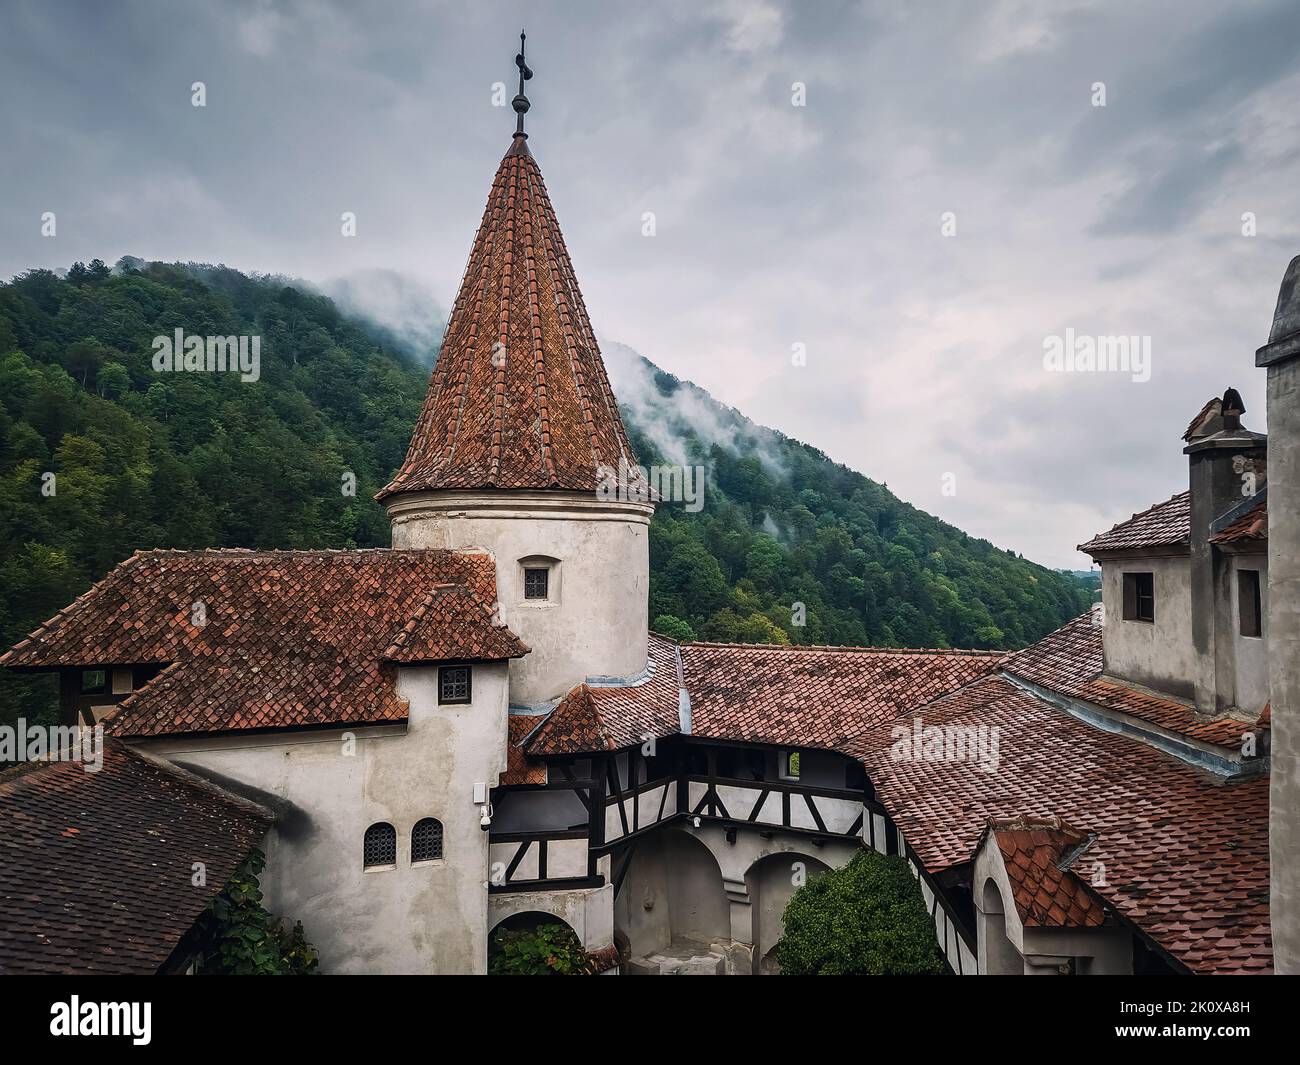 The medieval Bran fortress known as Dracula castle in Transylvania, Romania. Historical saxon style stronghold in the heart of Carpathian mountains Stock Photo